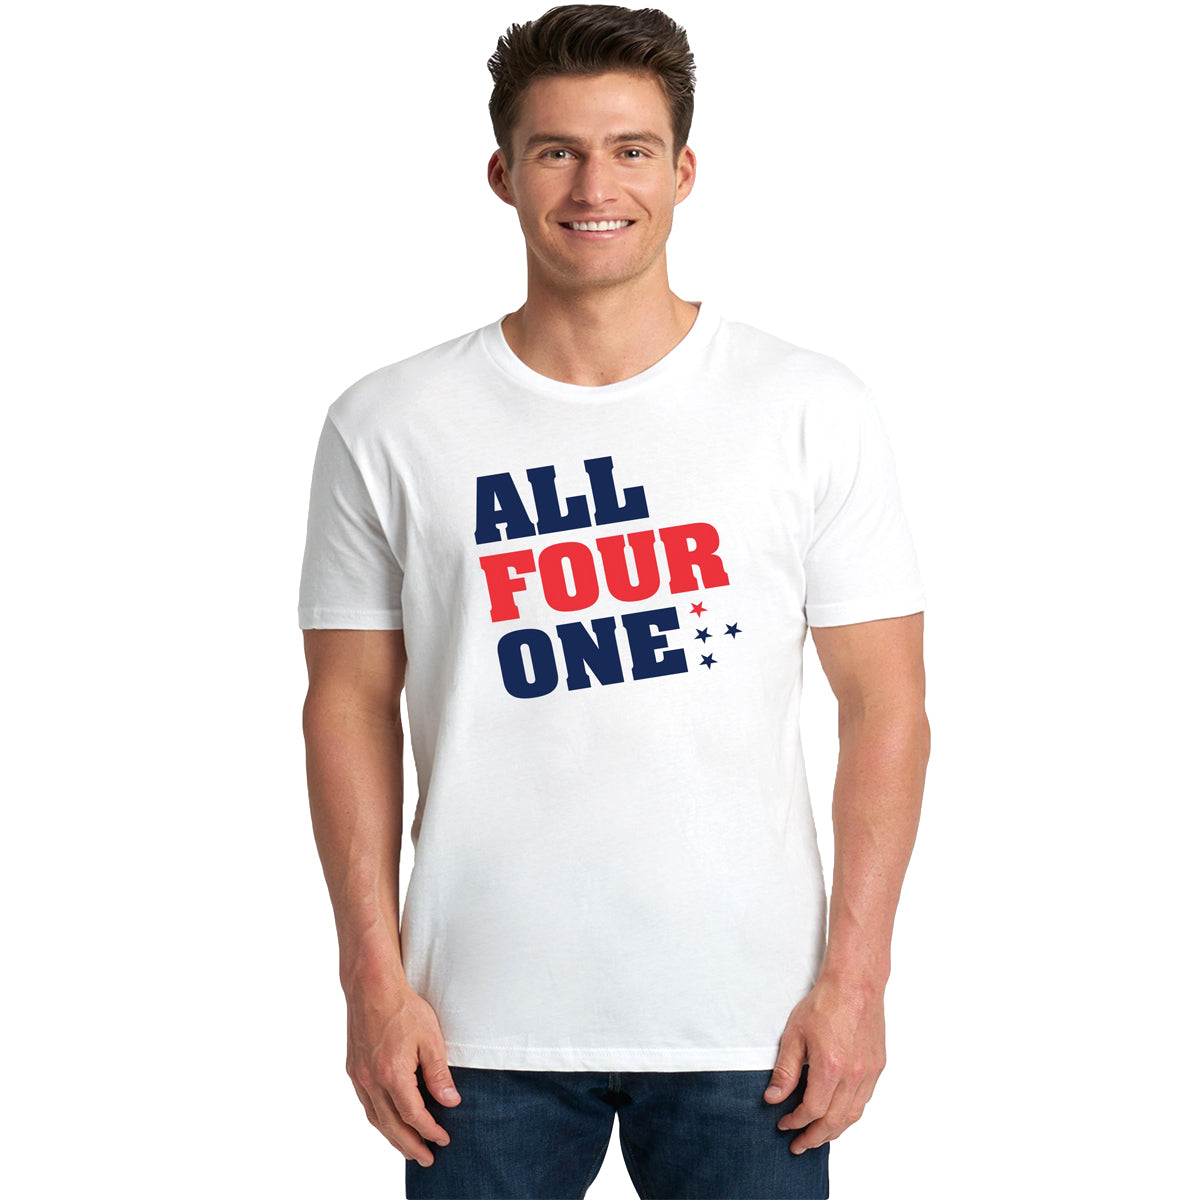 USA World Cup 2019 Champions Shirt - All 4 one T-shirts 411 Youth Medium White Youth